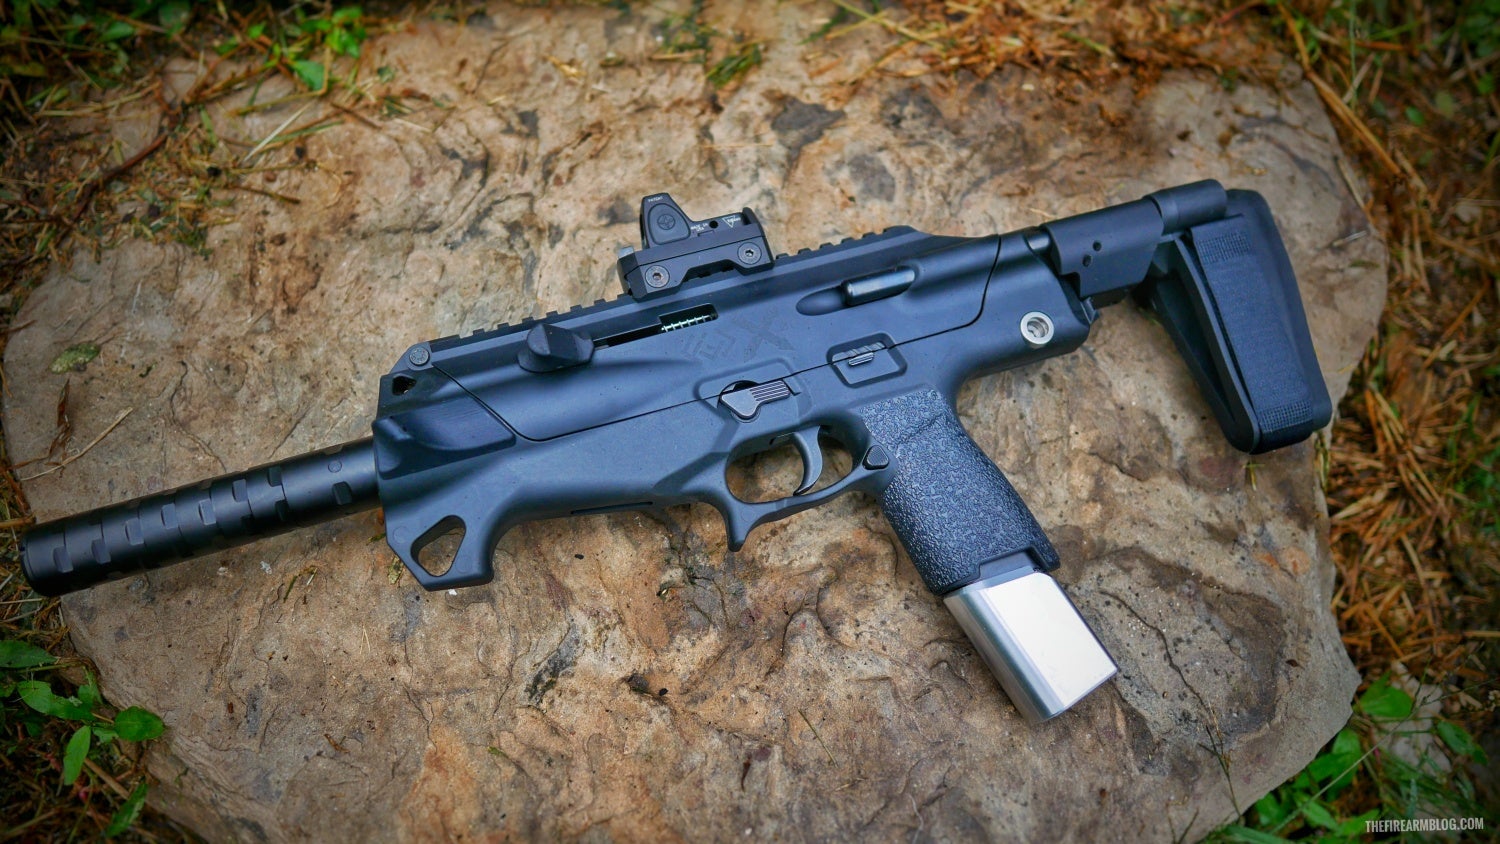 TFB REVIEW: Fire Control Unit X01 PDW - The Future Of Small Arms -The  Firearm Blog